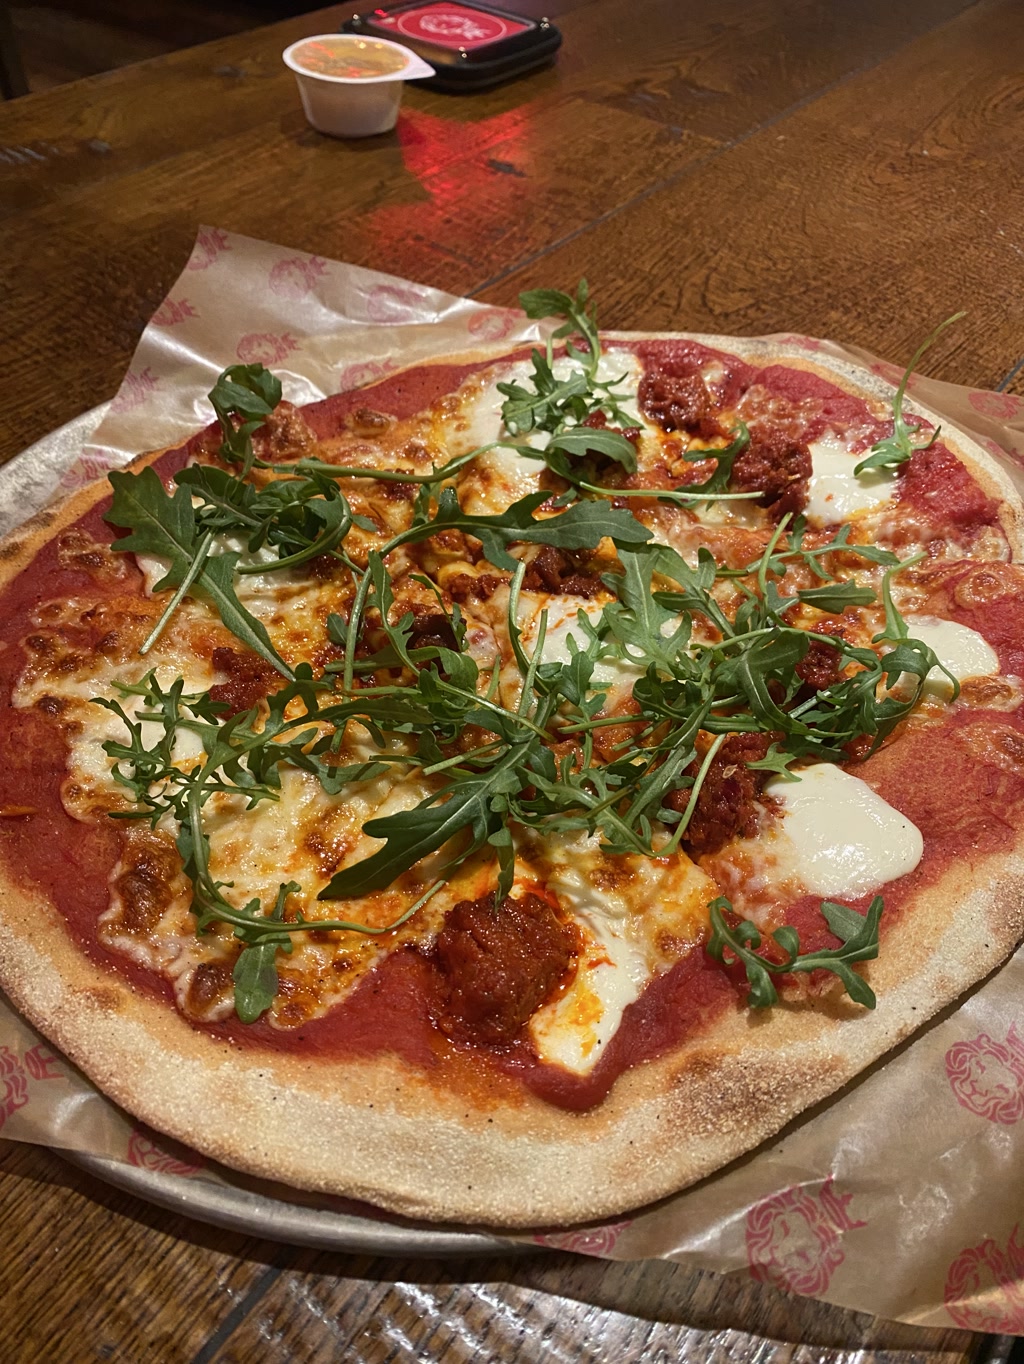 A whole pizza with a slightly charred crust is presented on a table, topped with vibrant green arugula leaves scattered over melted cheese with golden-brown spots. There are pieces of what appears to be spicy salami or pepperoni and dabs of white, possibly a soft cheese like mozzarella or ricotta. A container of dipping sauce is on the side, and a circular electronic device, maybe a restaurant pager, is in the background on the wooden table.